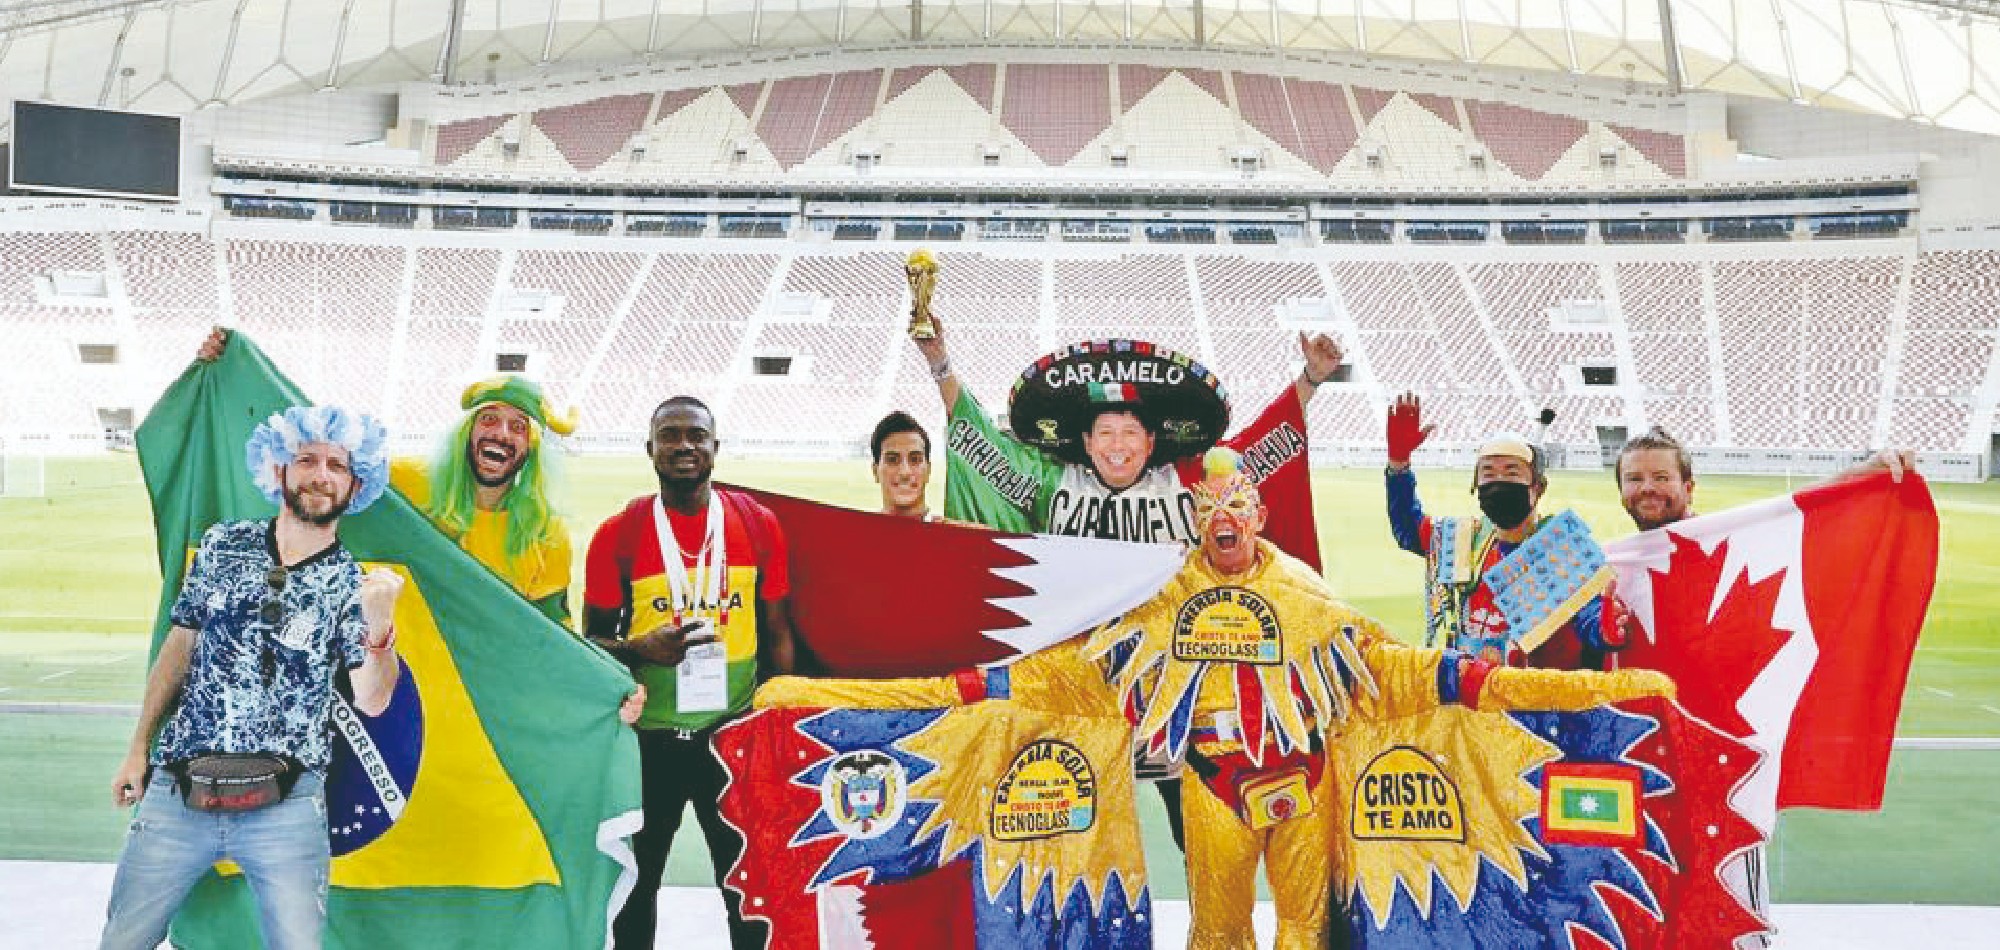 Fans from all over the world enjoy everything Qatar has to offer